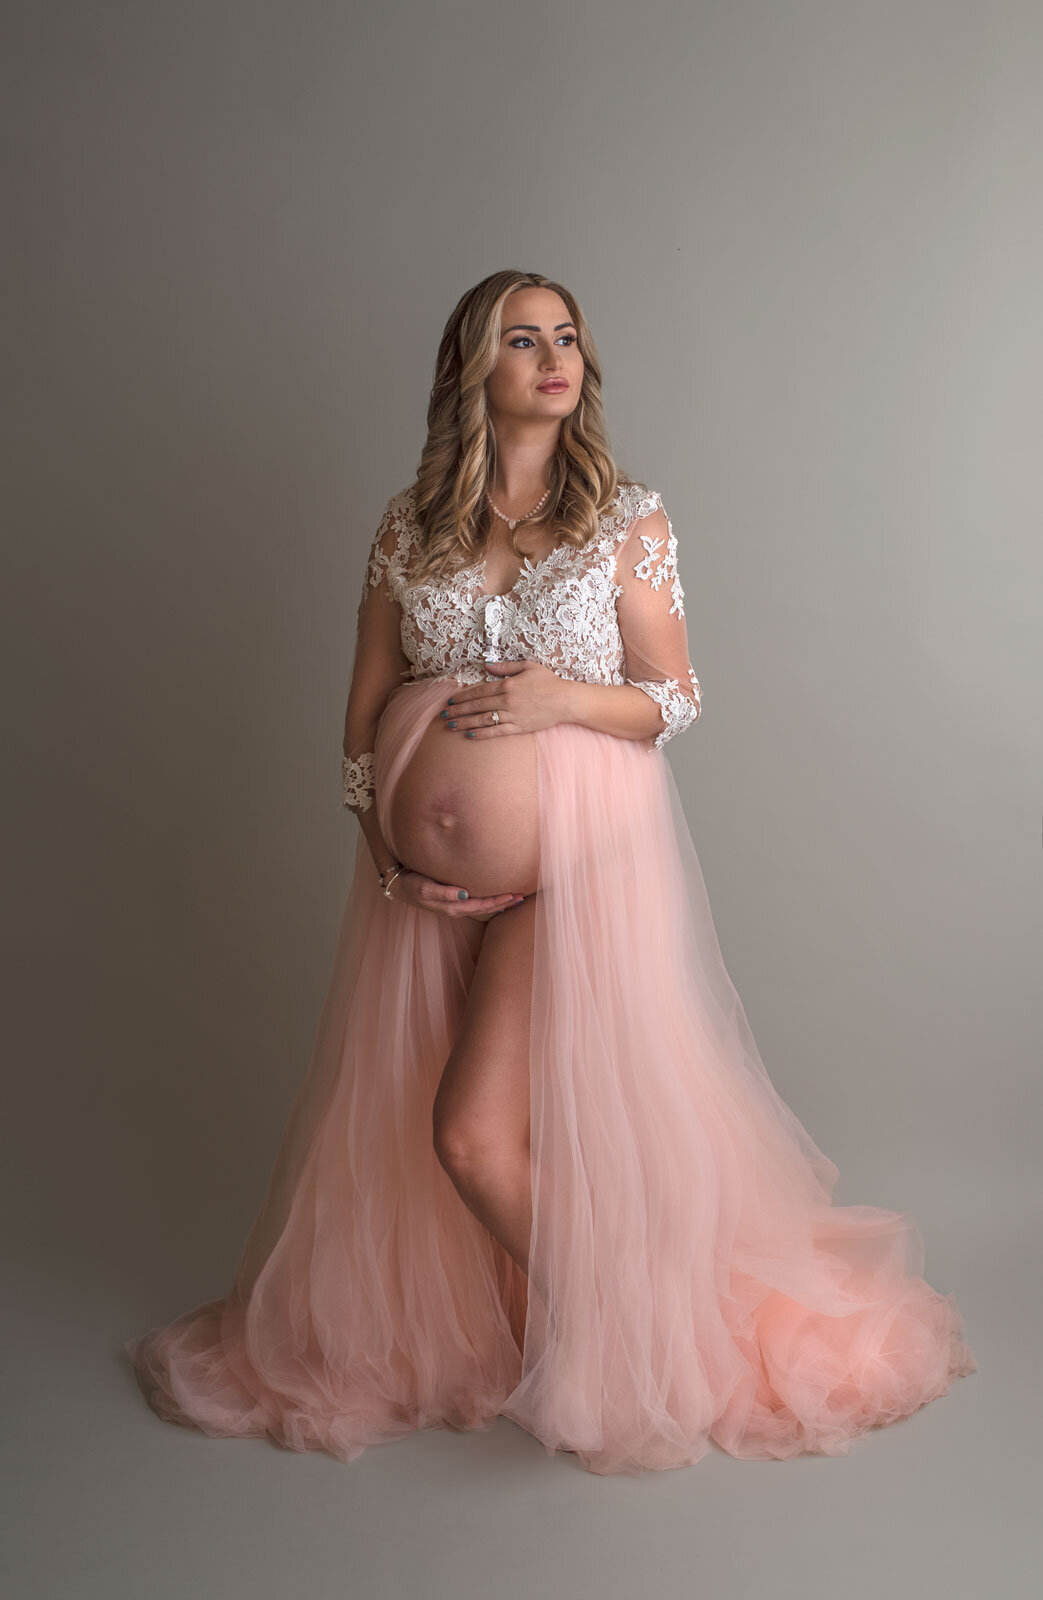 pregnant woman in pink and lace gown at st. louis maternity photo session